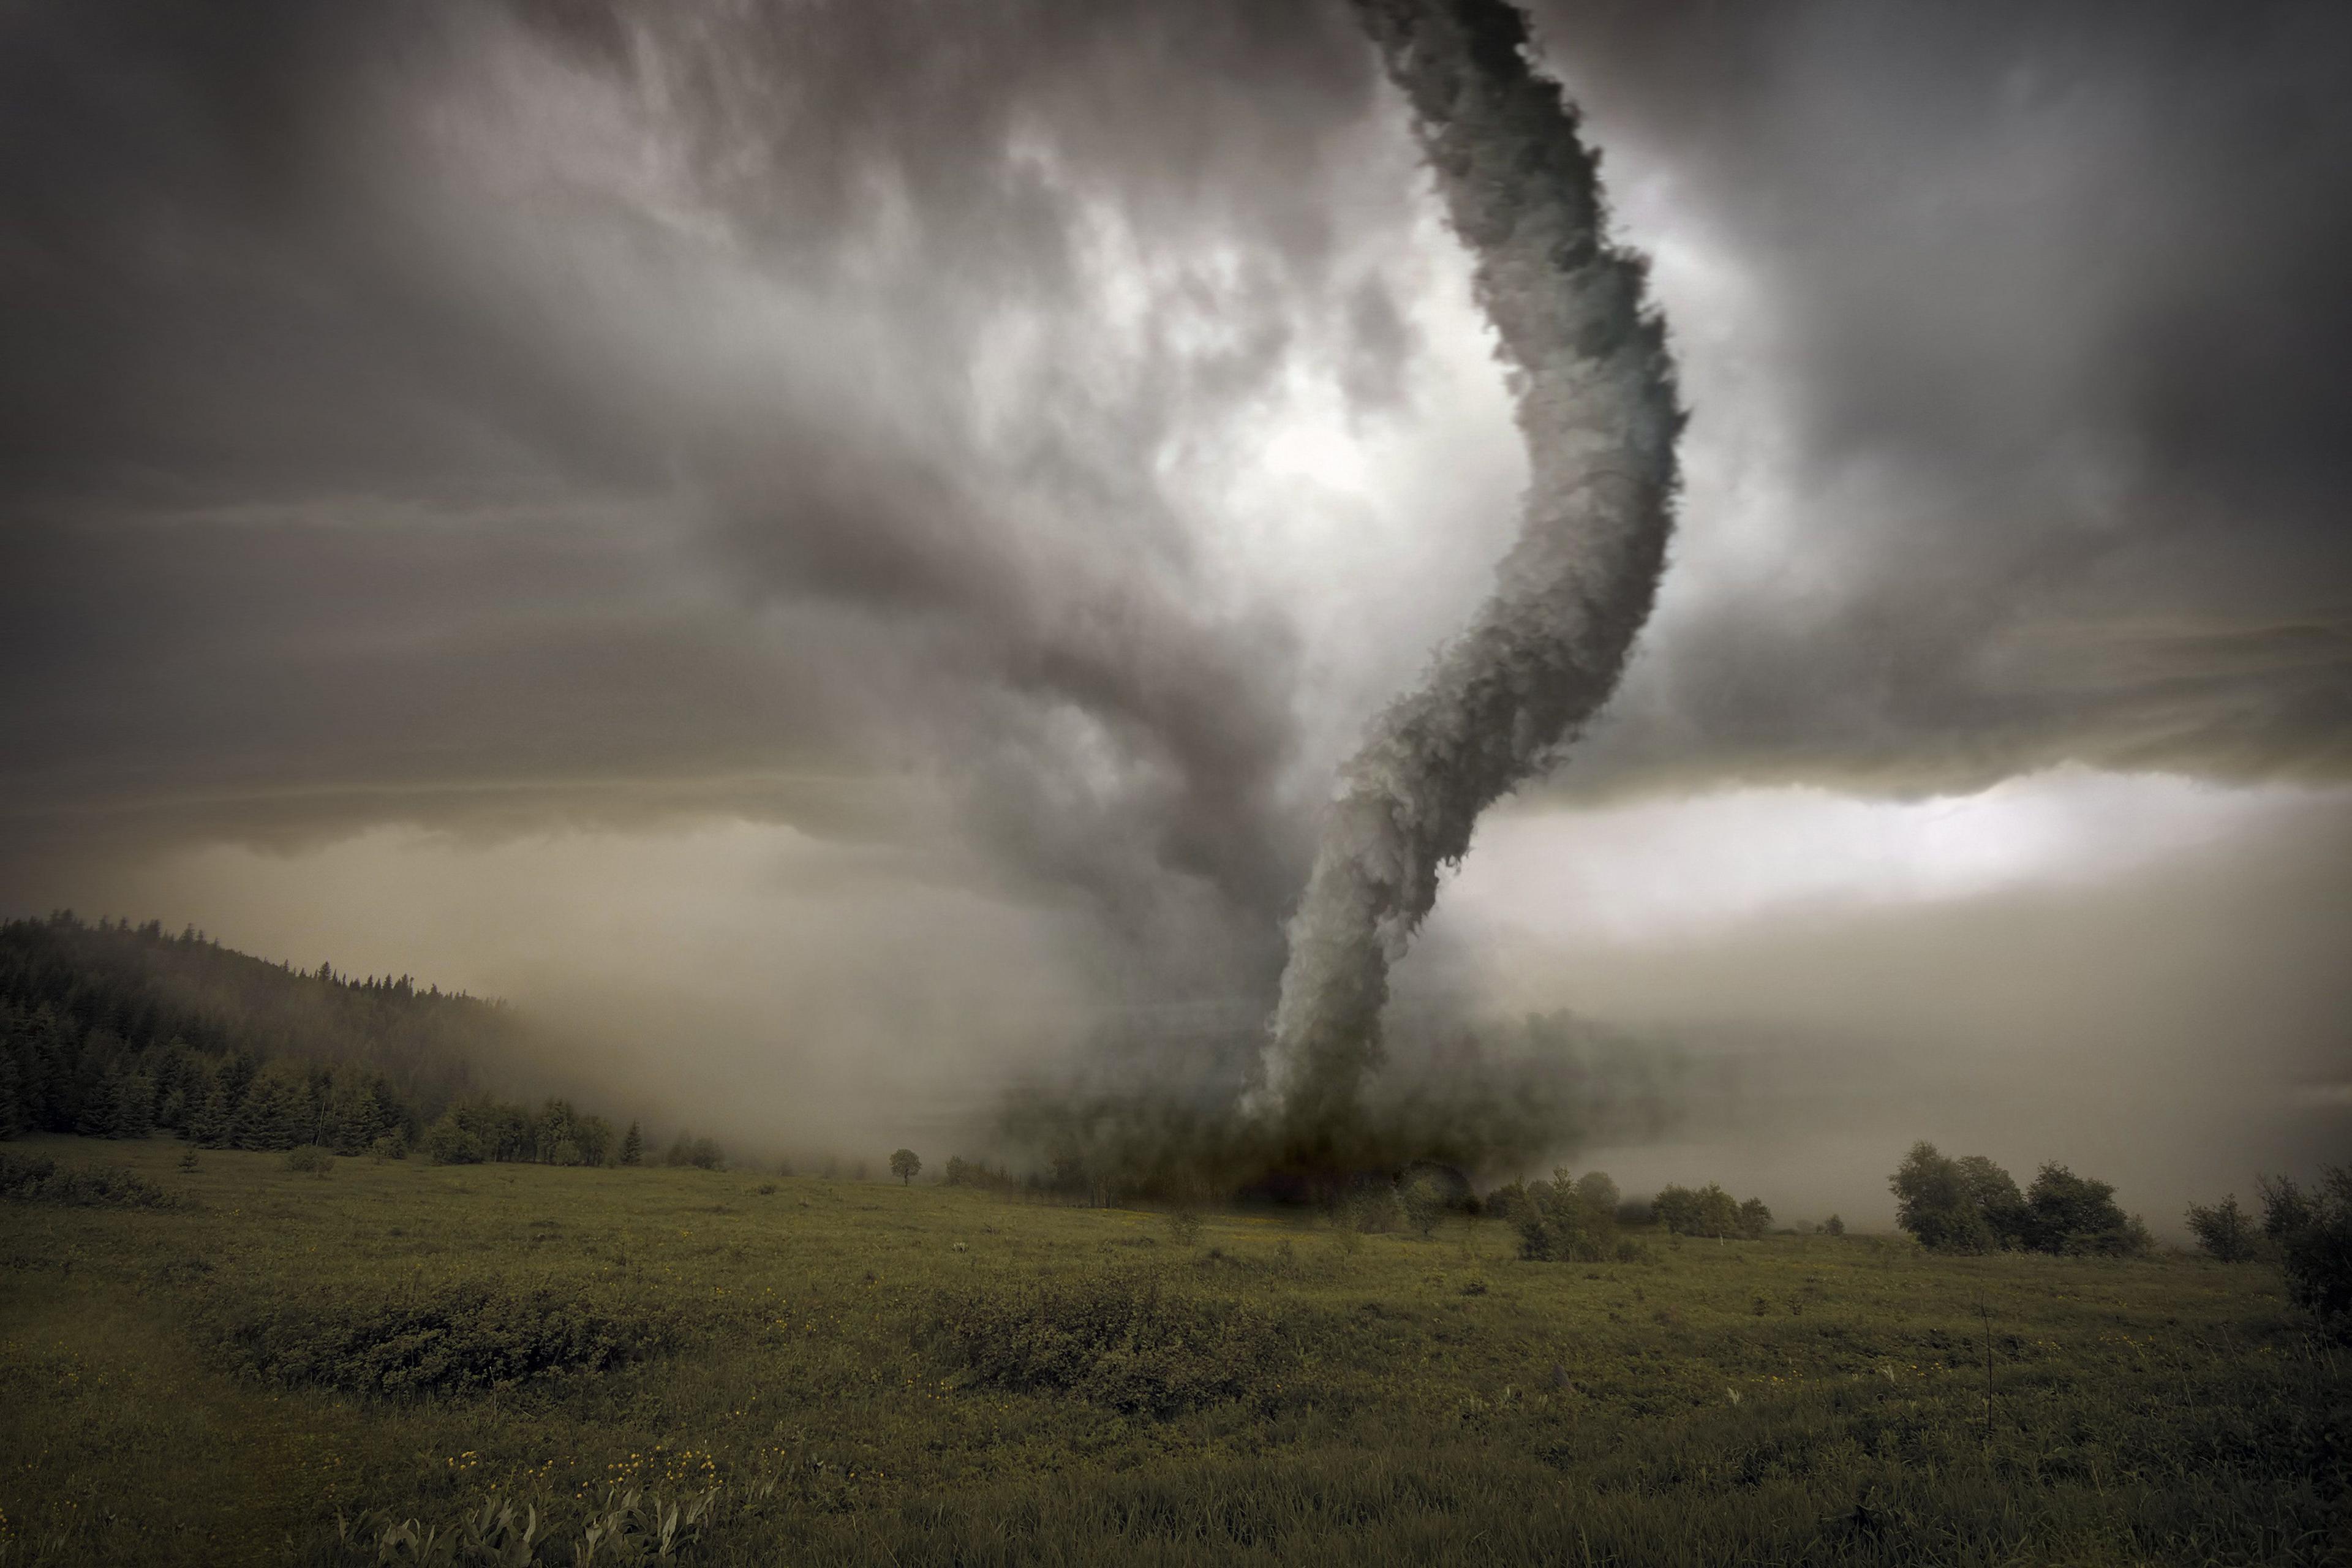 In three US states, powerful tornadoes are occurring